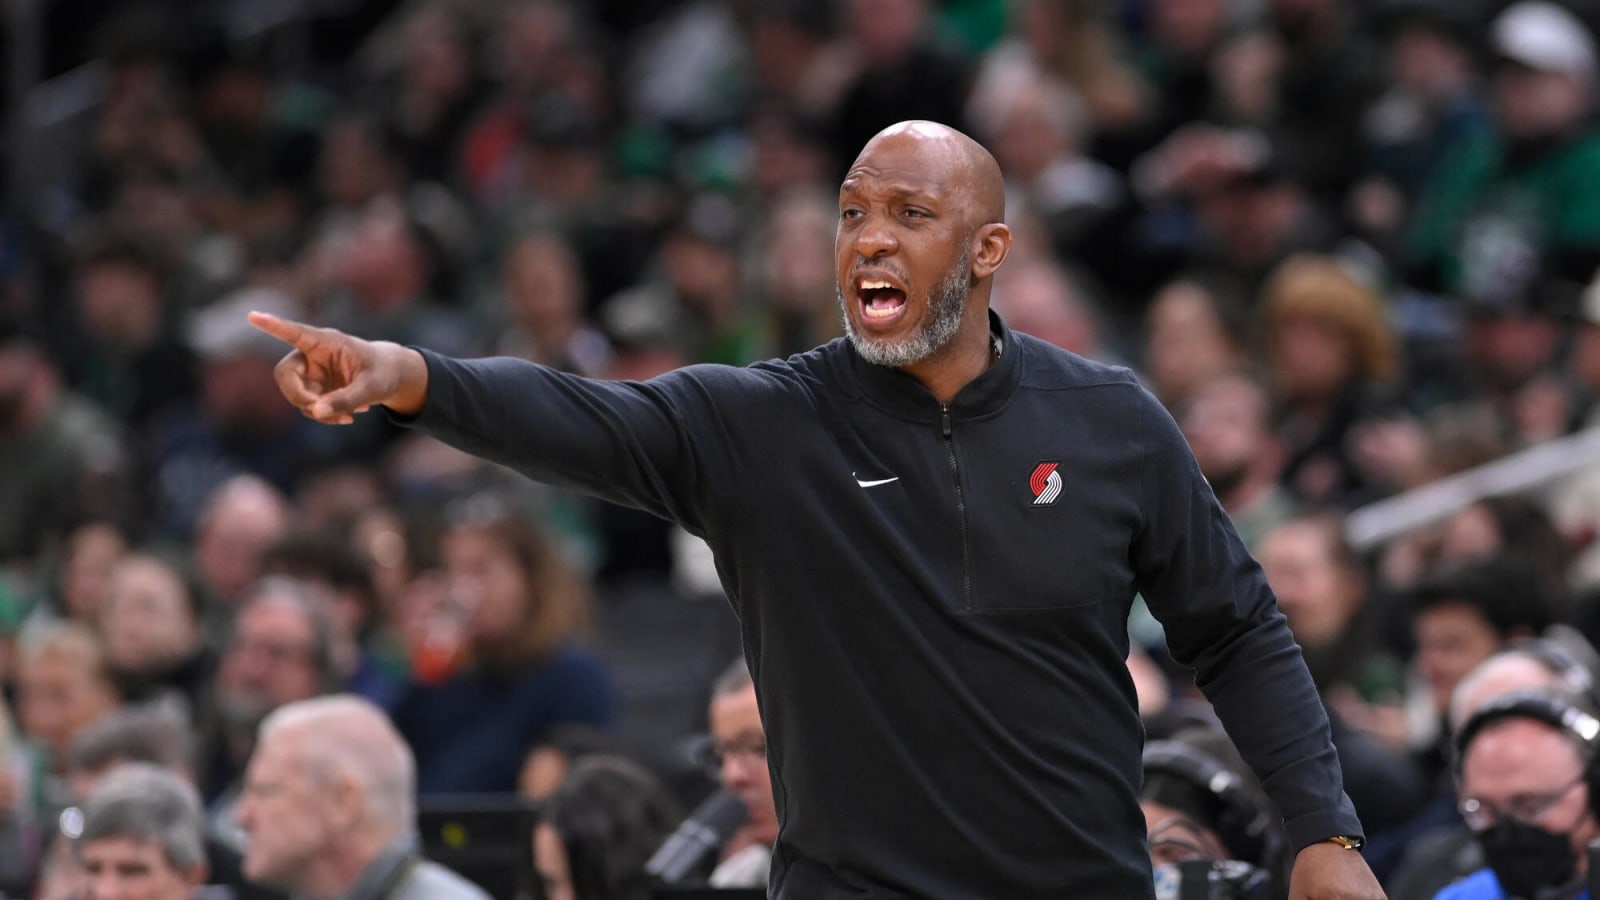 Portland Trail Blazers’ Chauncey Billups Viewed as 1 of the Popular Coaching Candidates If He Leaves, Per Renowned Analyst